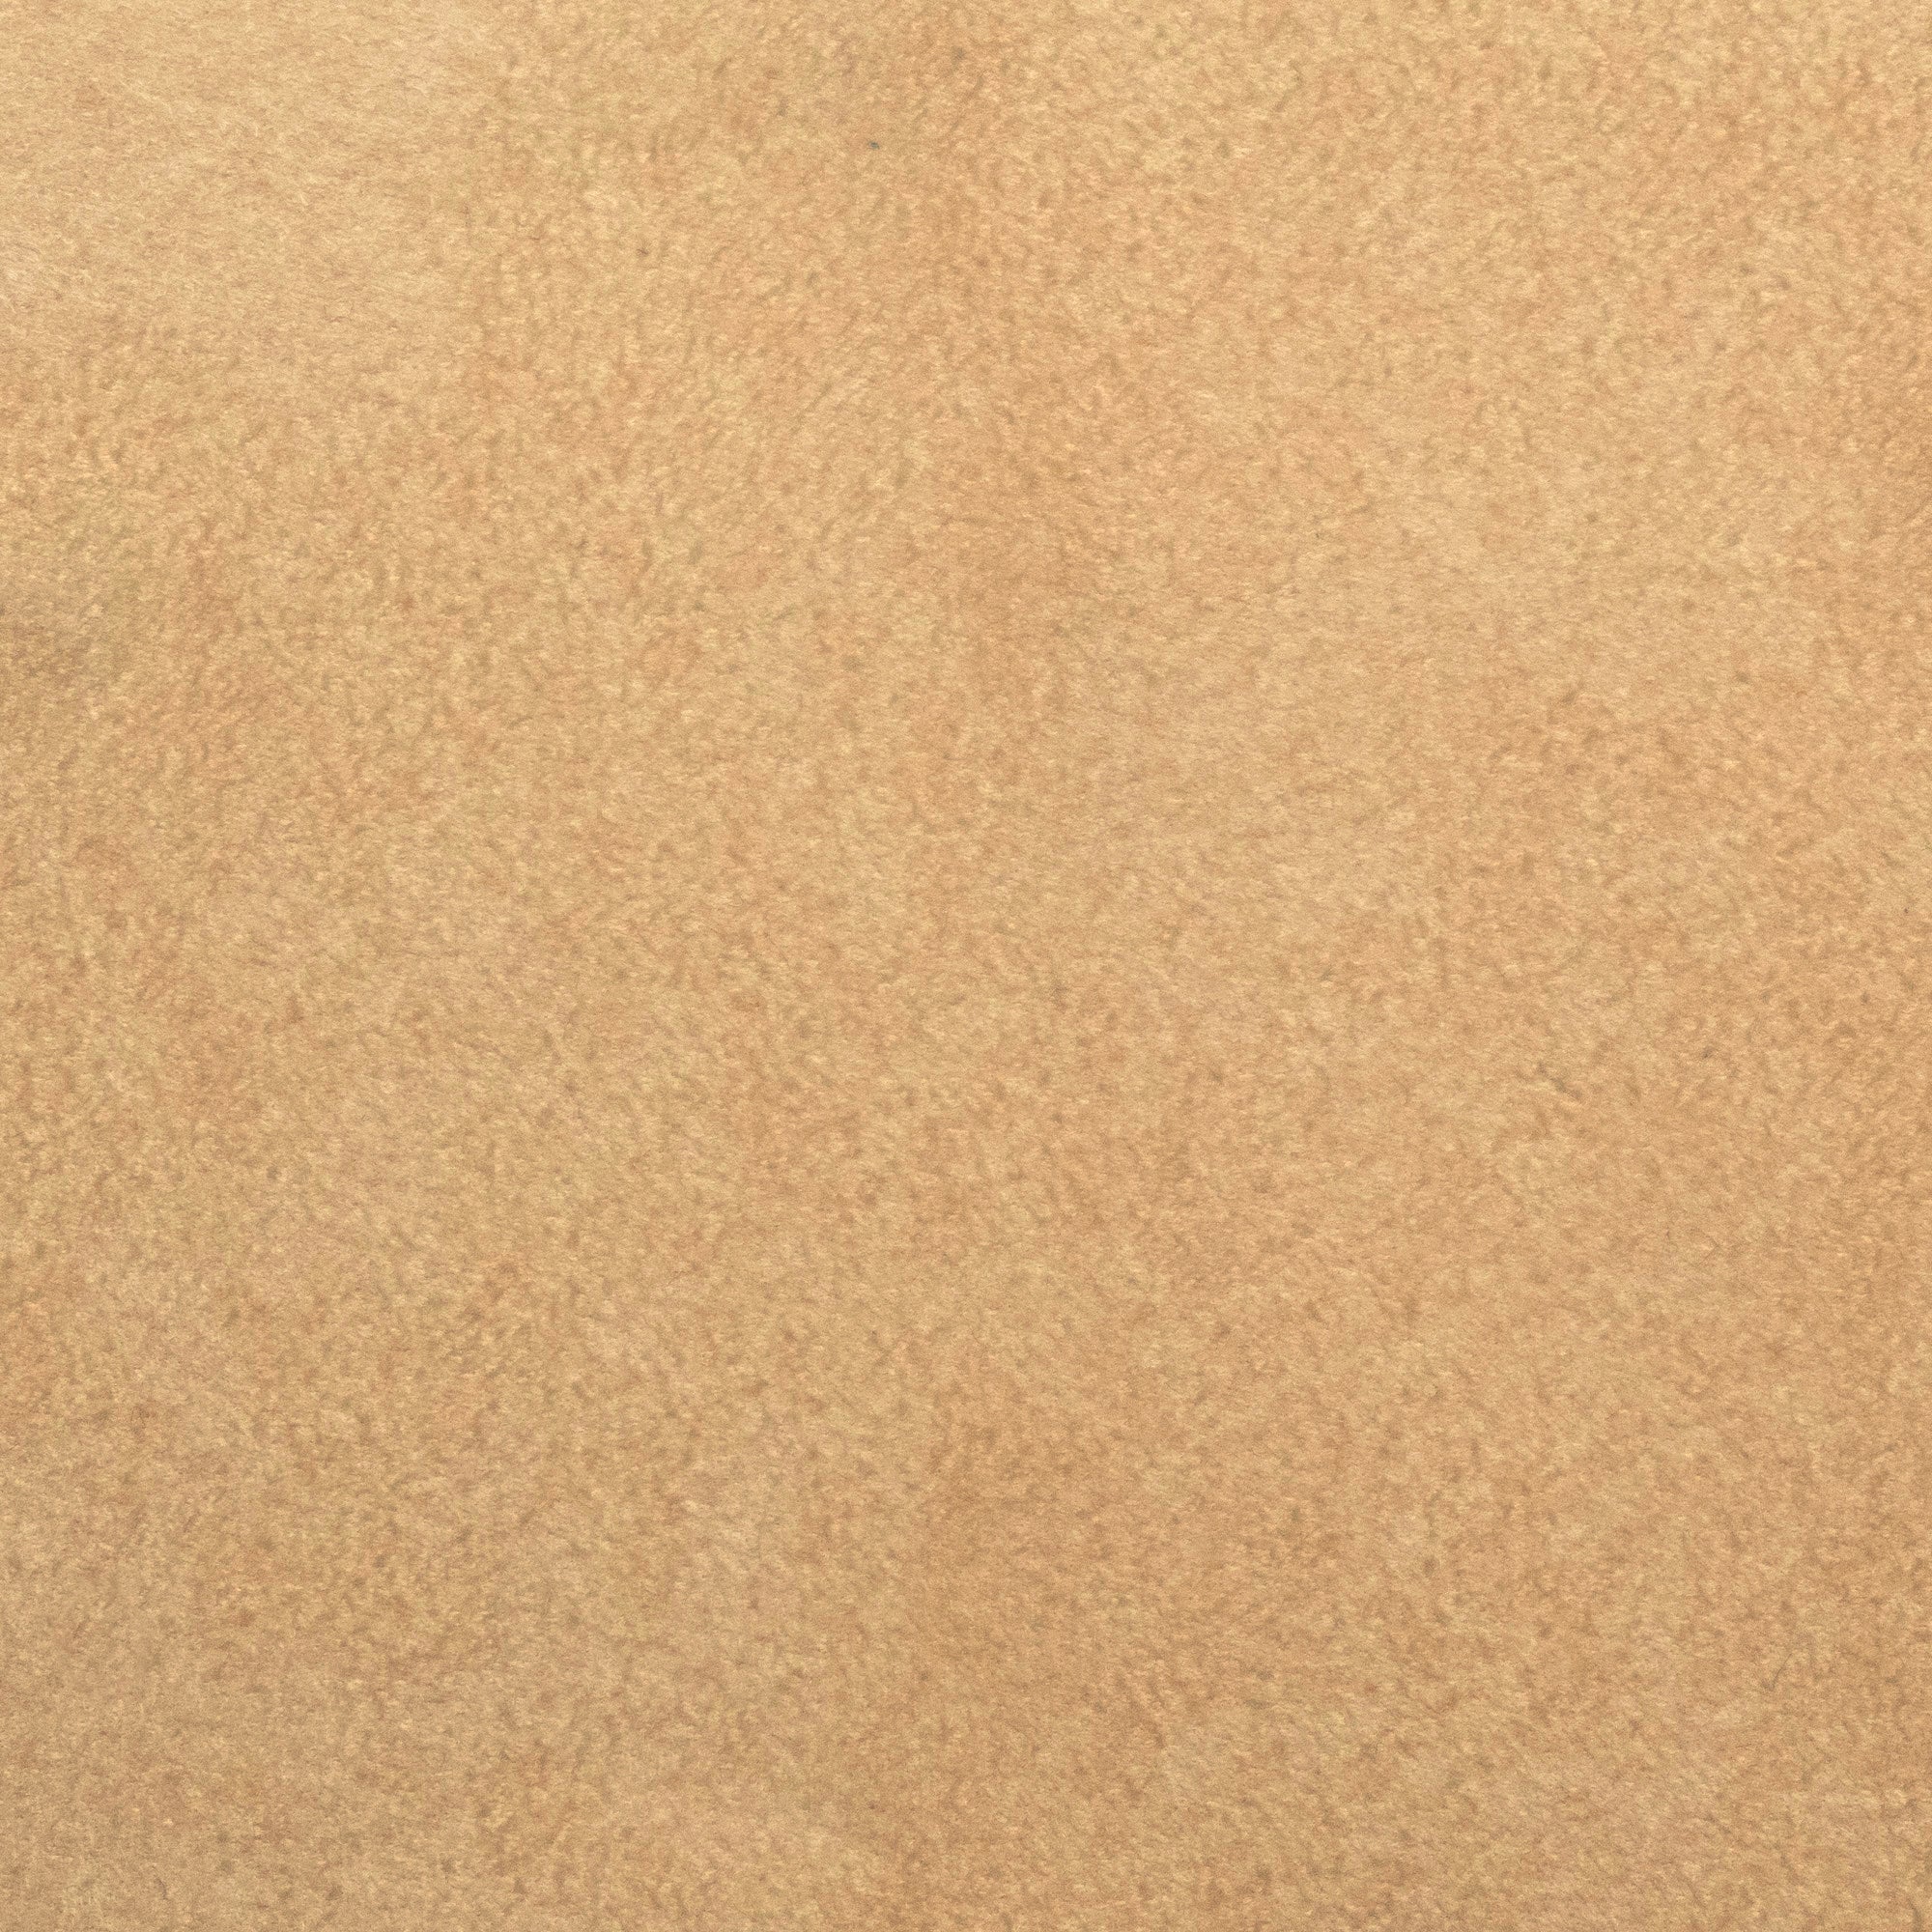 C055 Light Brown Suede Upholstery Grade Fabric by The Yard